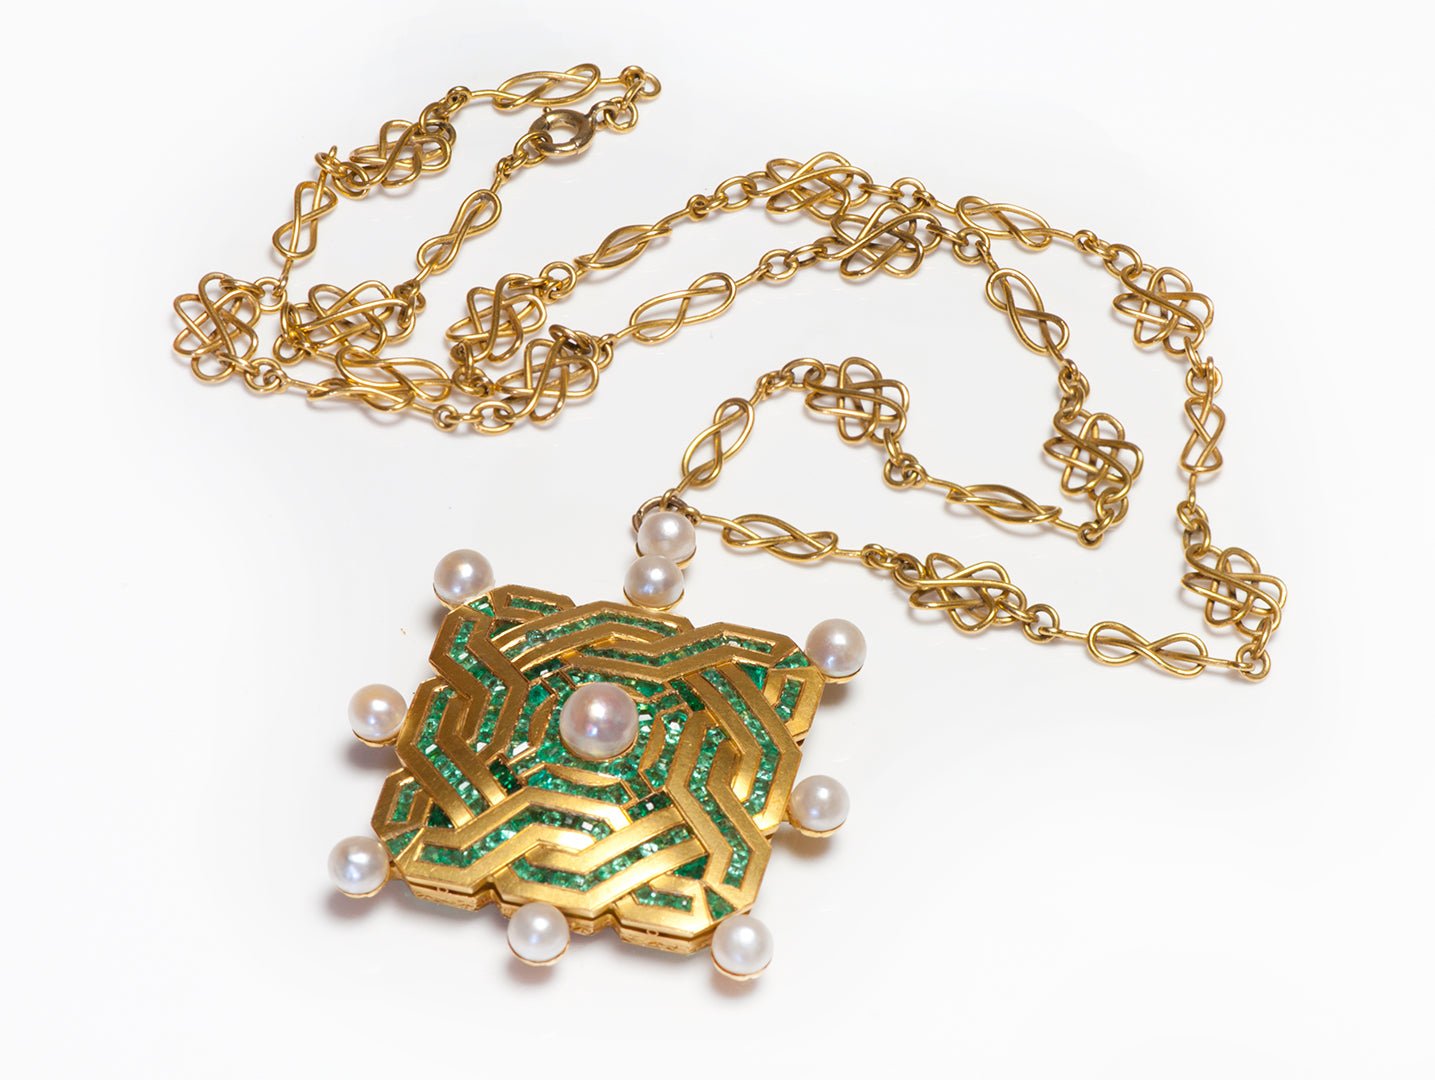 Antique Gold Emerald Pearl Juvenia Watch Pendant and Chain - DSF Antique Jewelry